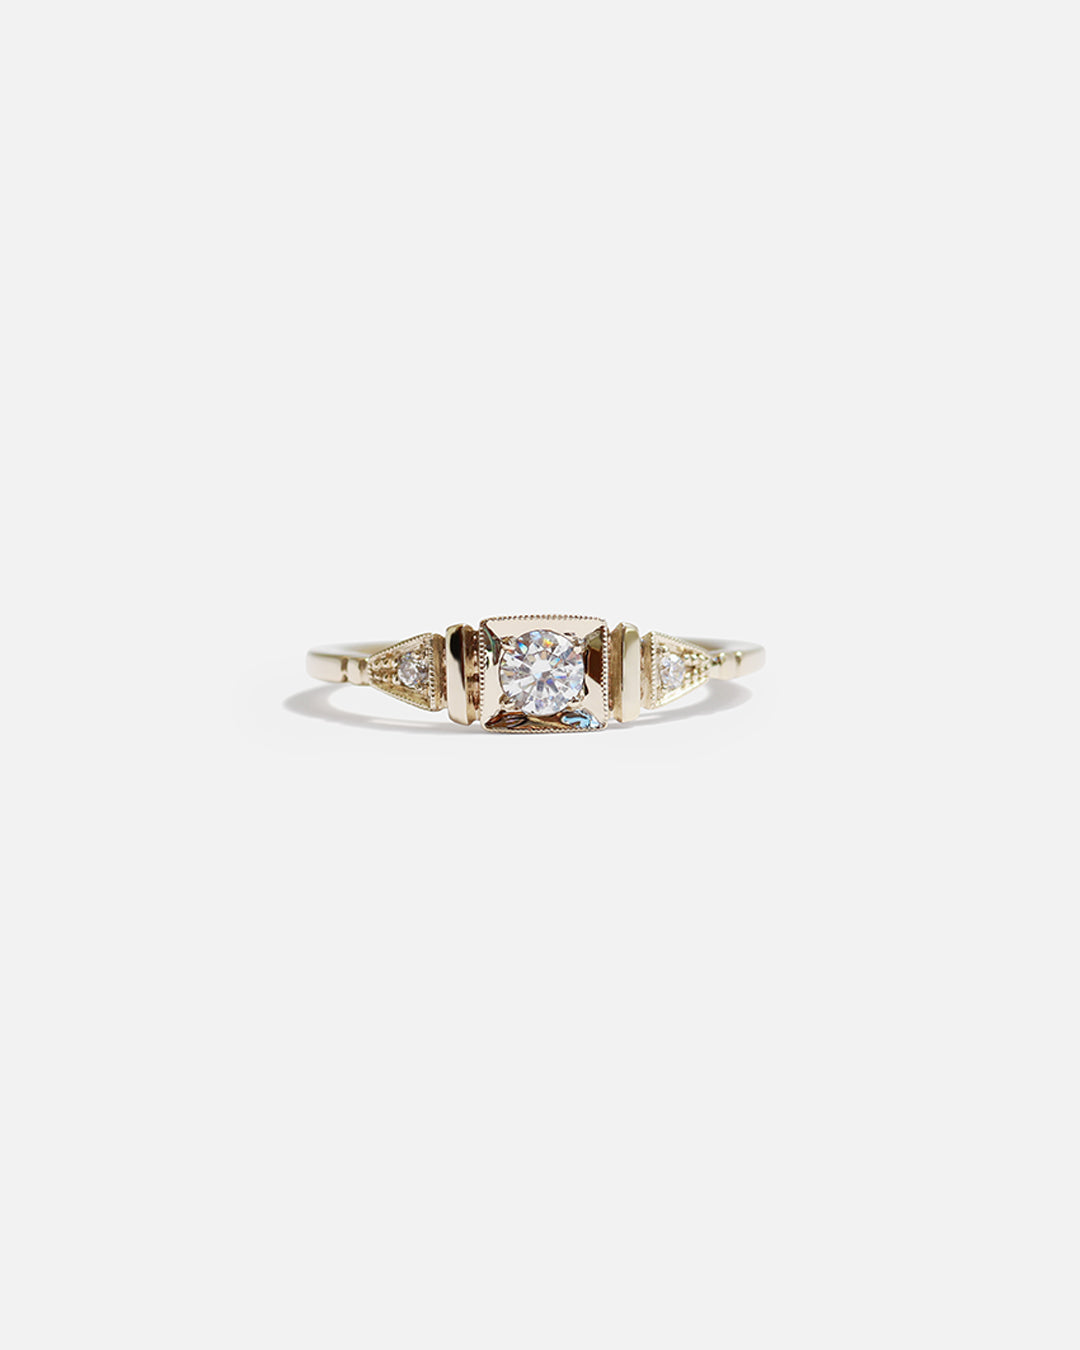 Ella Ring / White Diamonds By Katrina La Penne in Engagement Rings Category